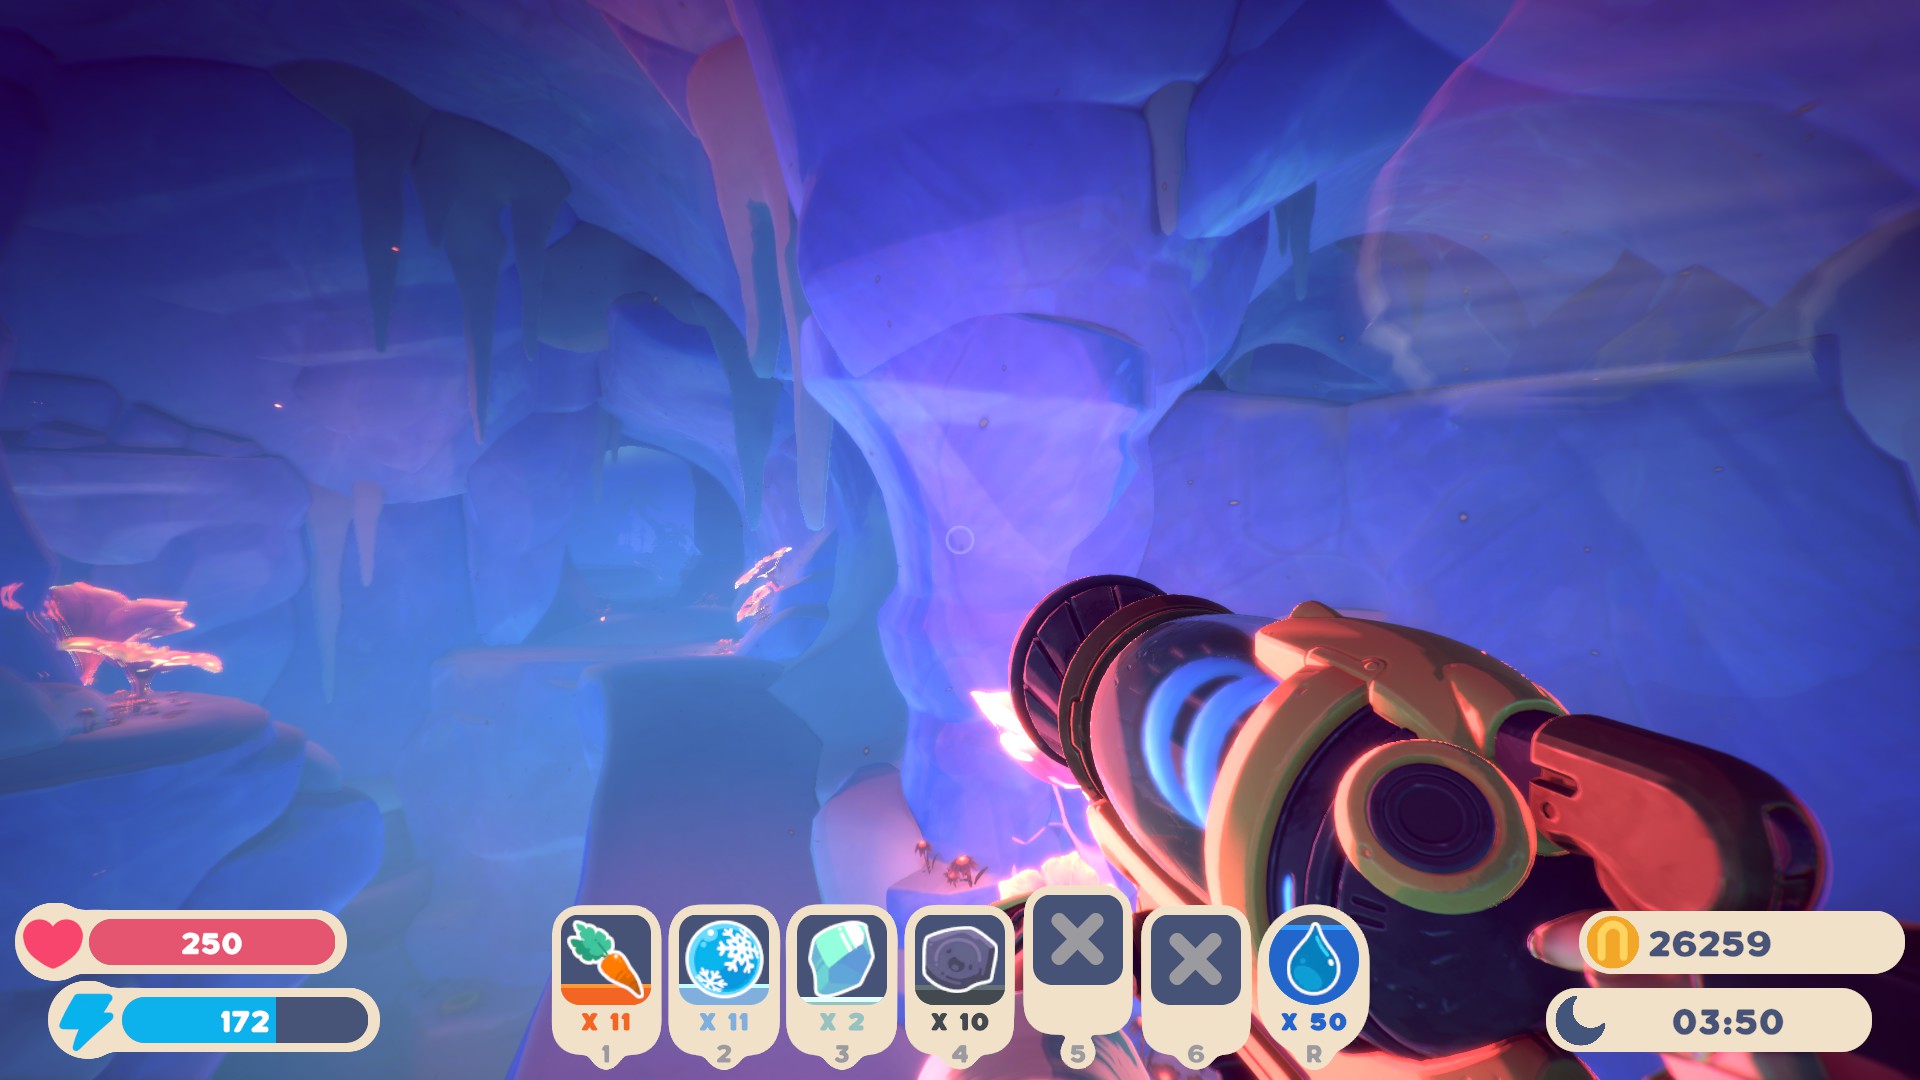 Slime Rancher 2 - Capsule Locations for Powderfall Bluffs - Pods 7 - 12 (Underground) - 64290C0